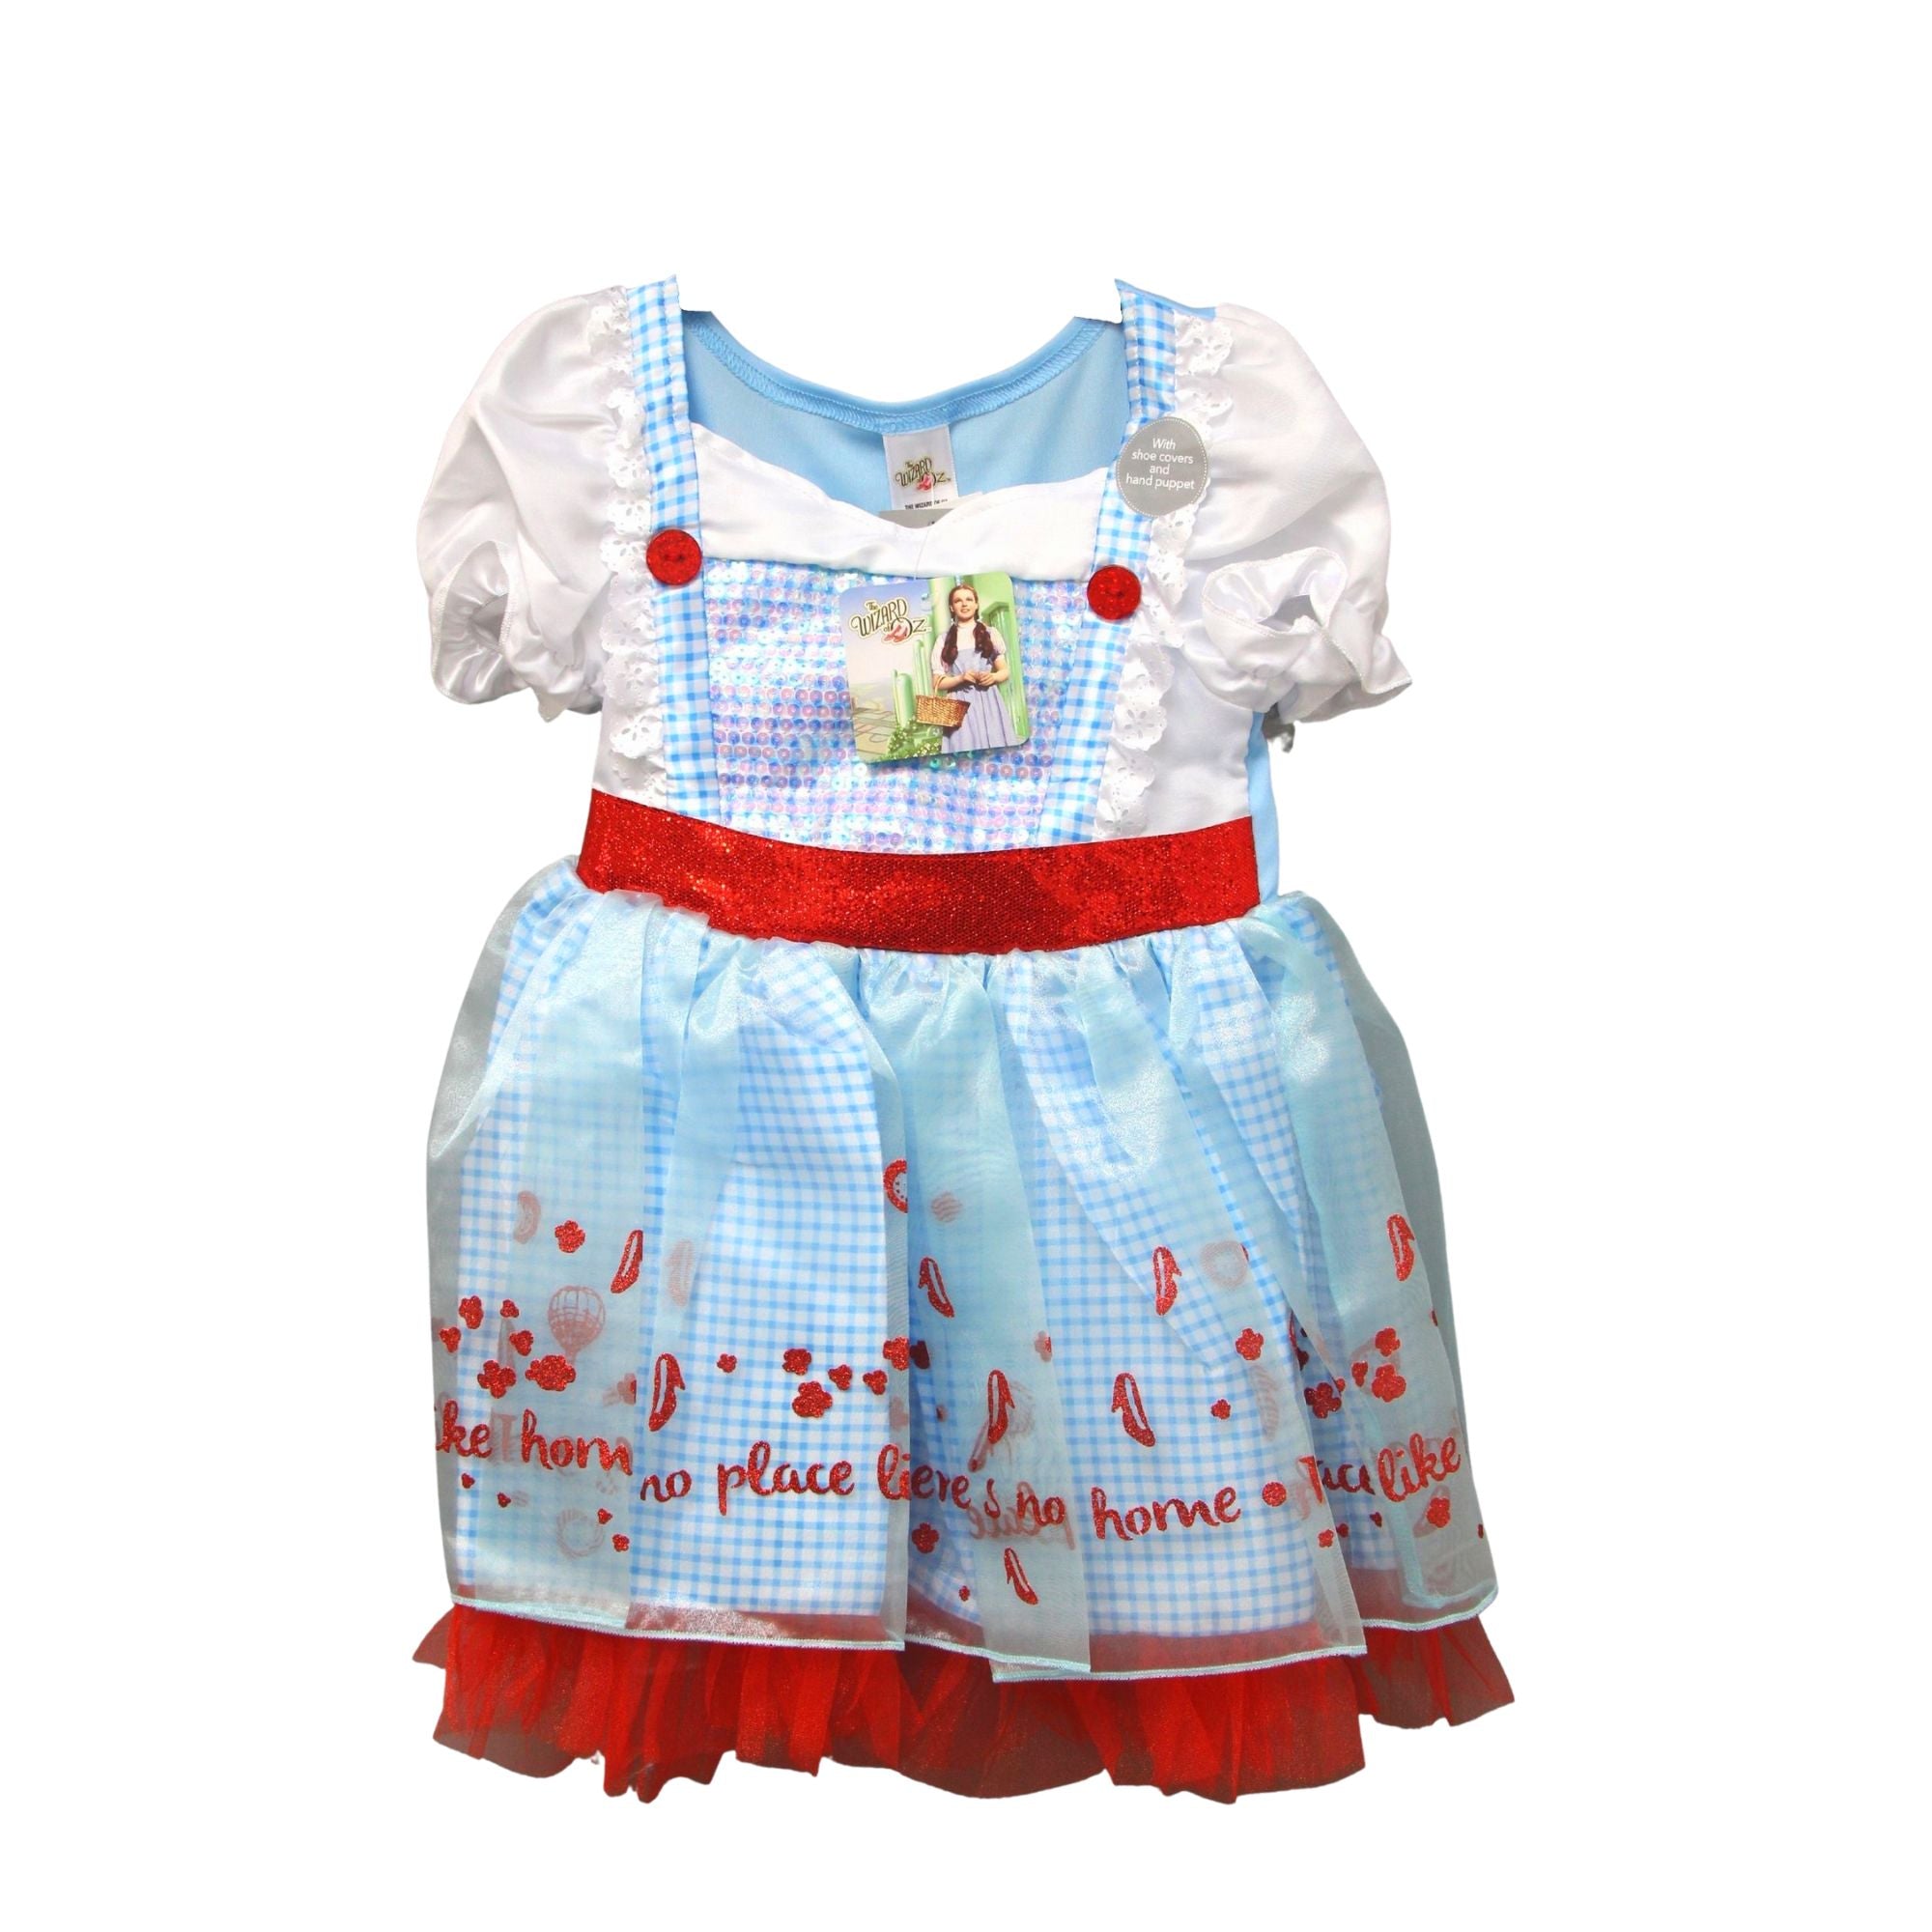 The Wizard of Oz Dorothy Sequin Children's Fancy Dress Costume Includes Shoe Covers, Hand Puppet and Bag - Toptoys2u